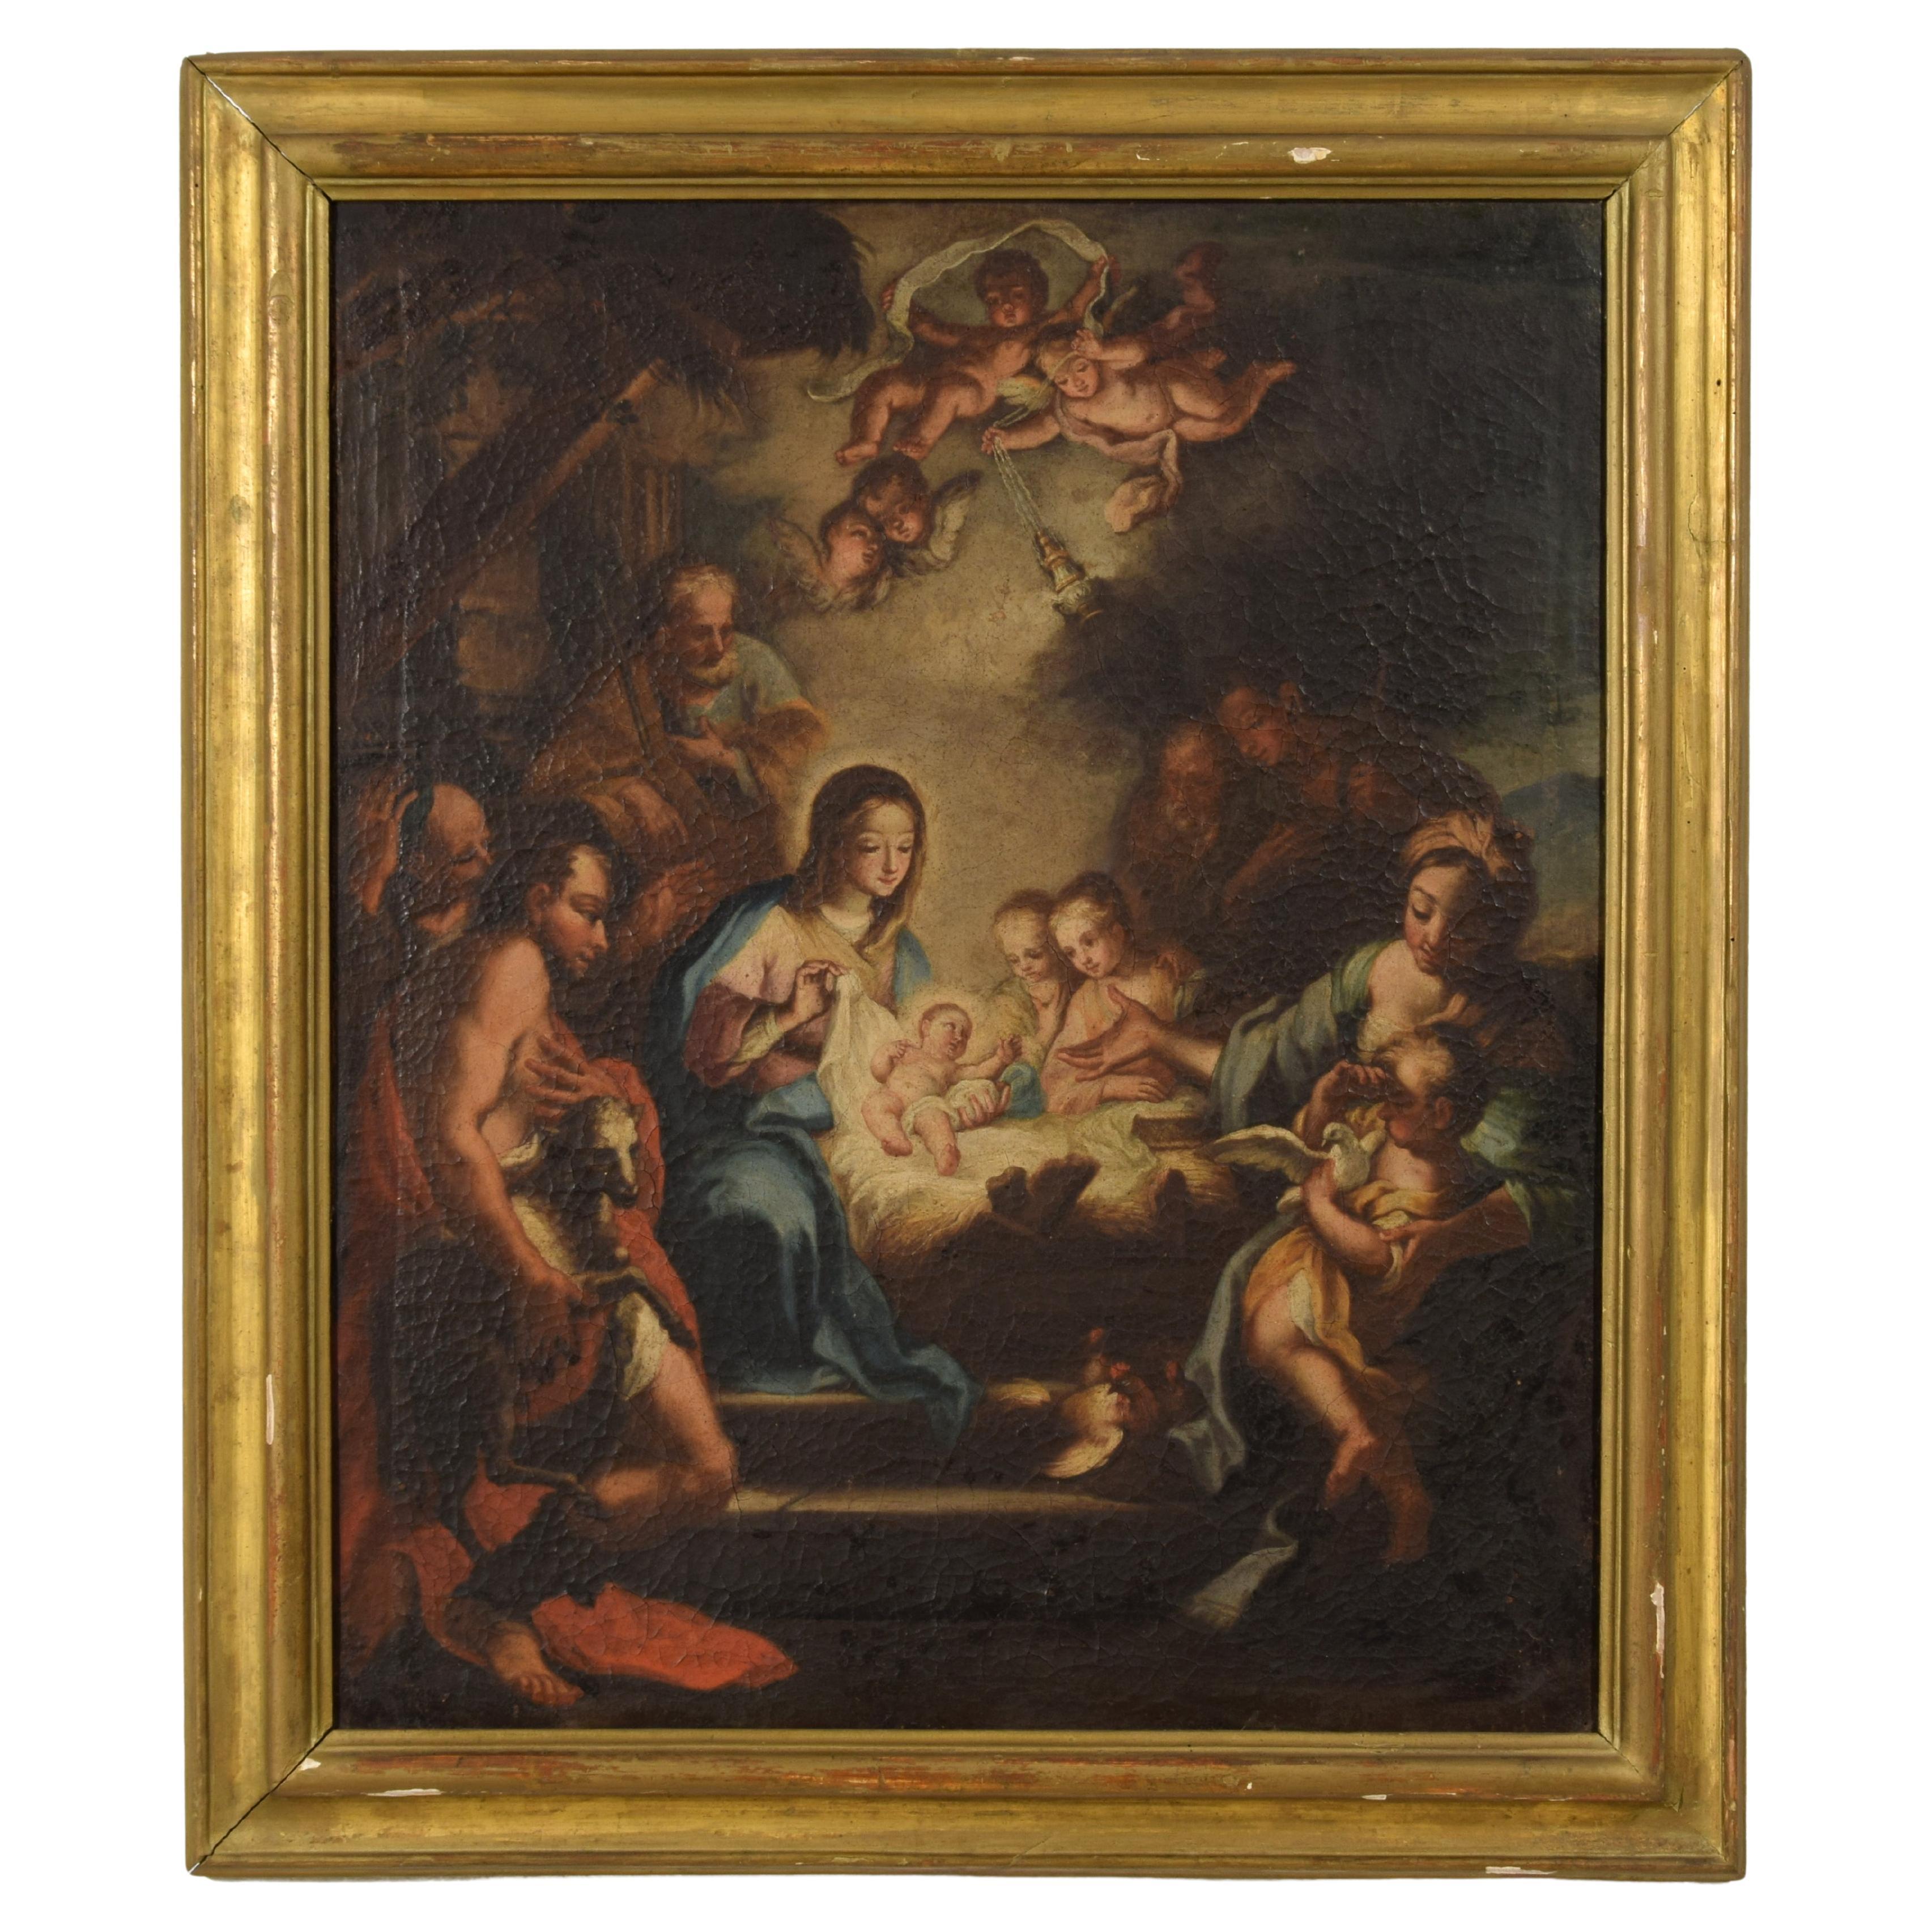 18th Century, Italian Painting, Adoration of the Shepherds by Follower of Conca